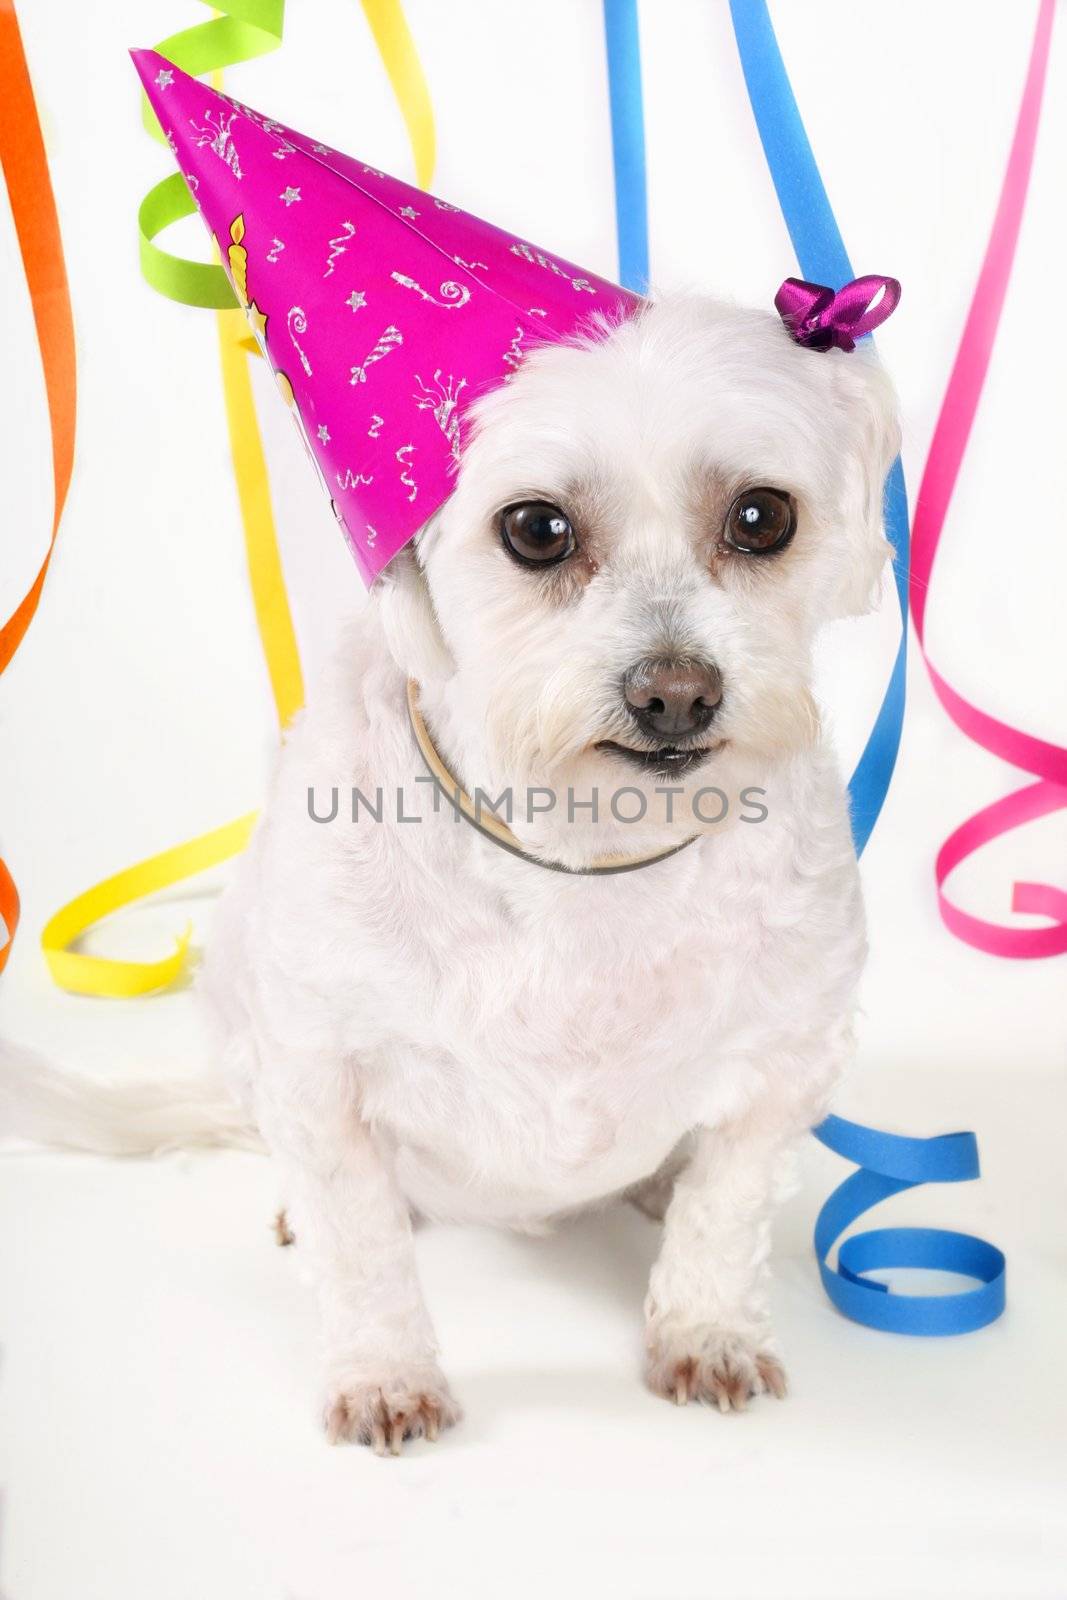 Party Pooch by lovleah